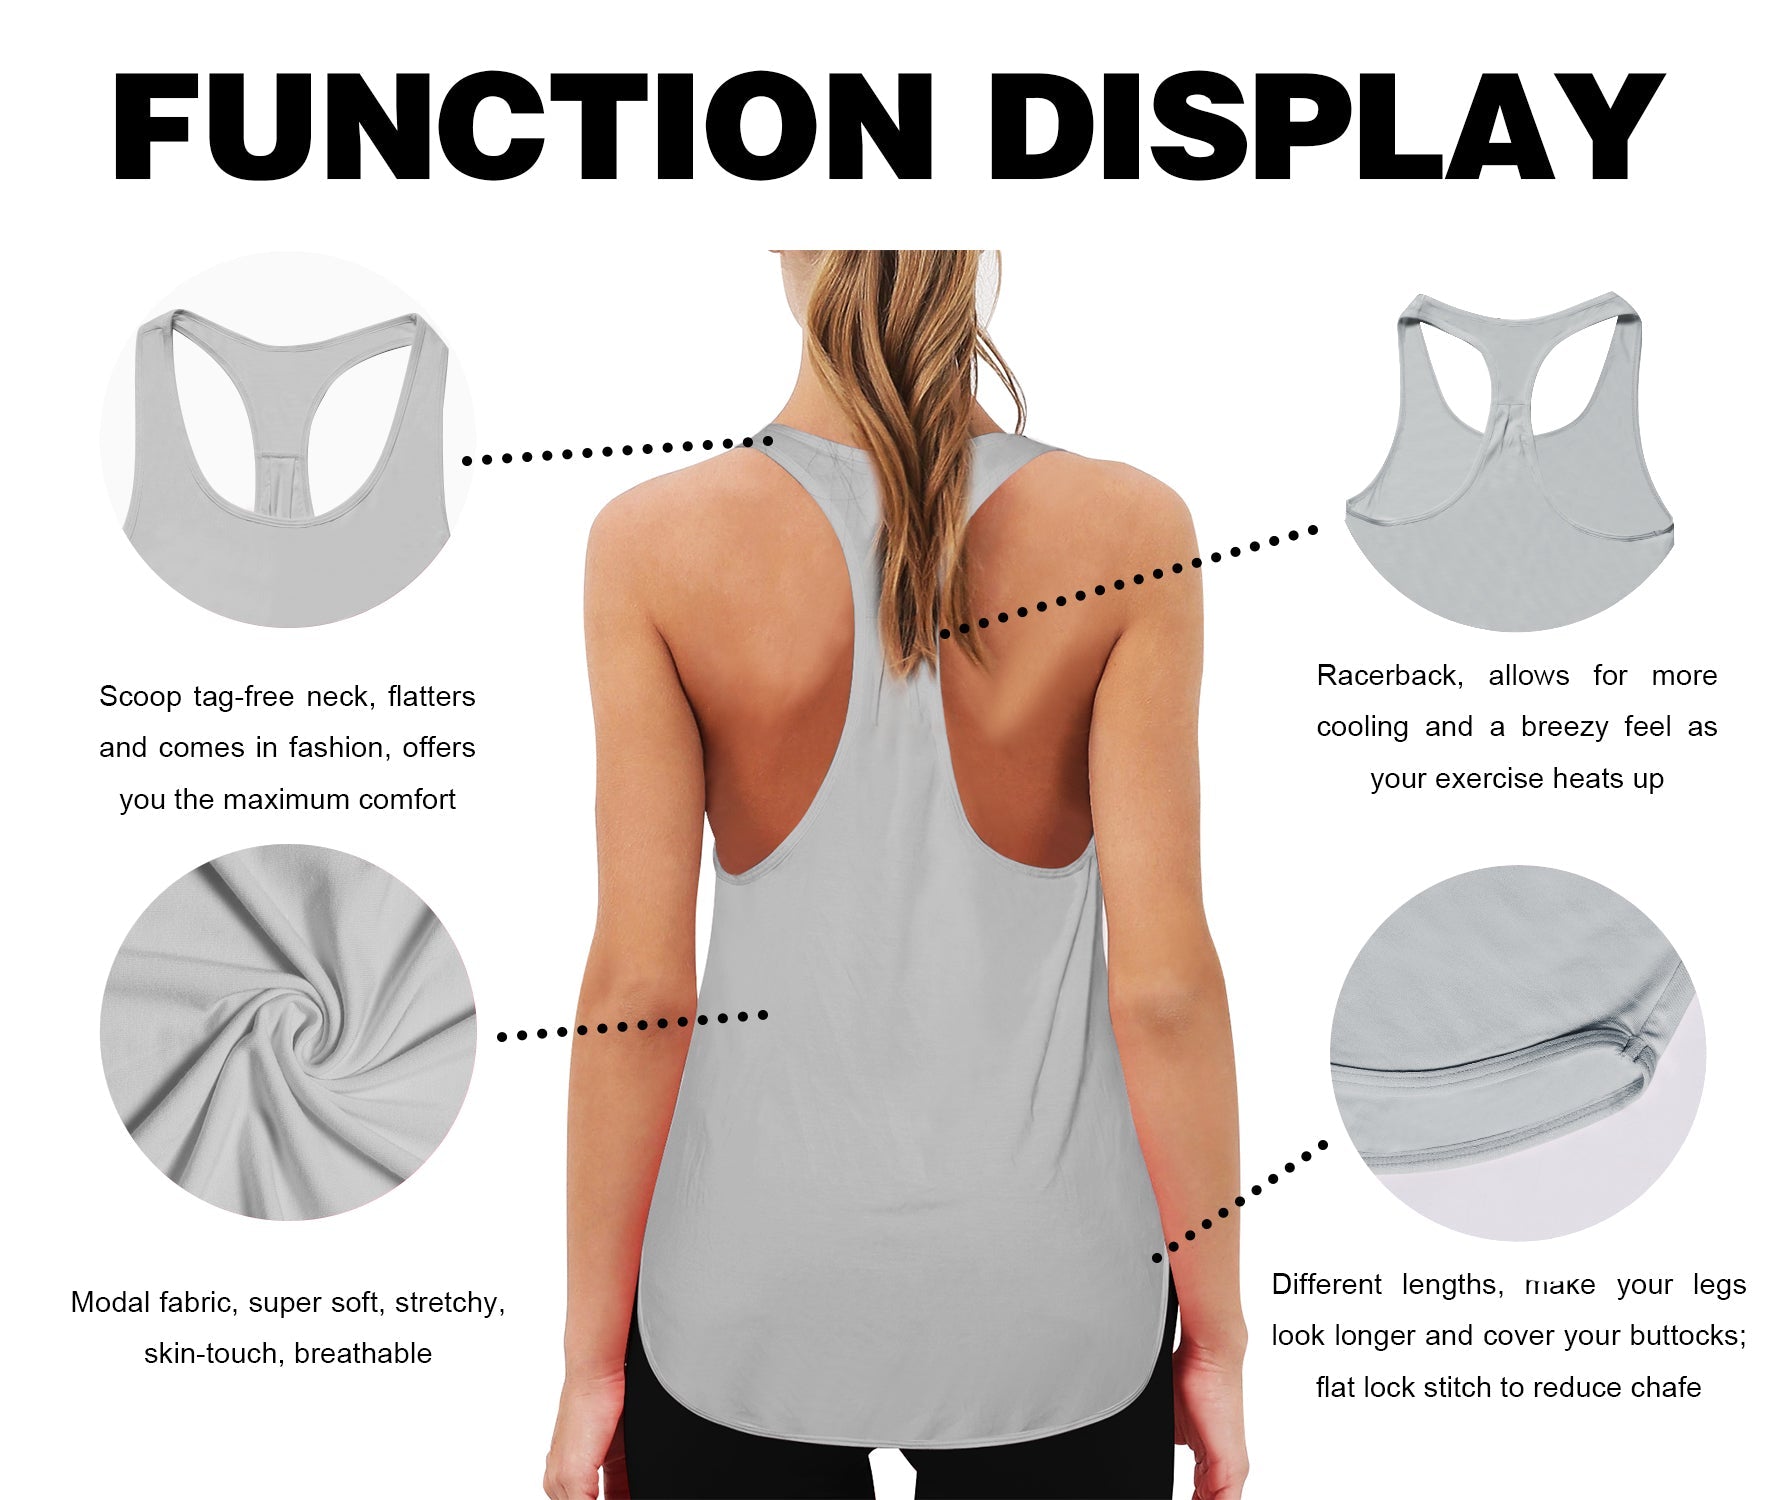 Loose Fit Racerback Tank Top lightgray Designed for On the Move Loose fit 93%Modal/7%Spandex Four-way stretch Naturally breathable Super-Soft, Modal Fabric